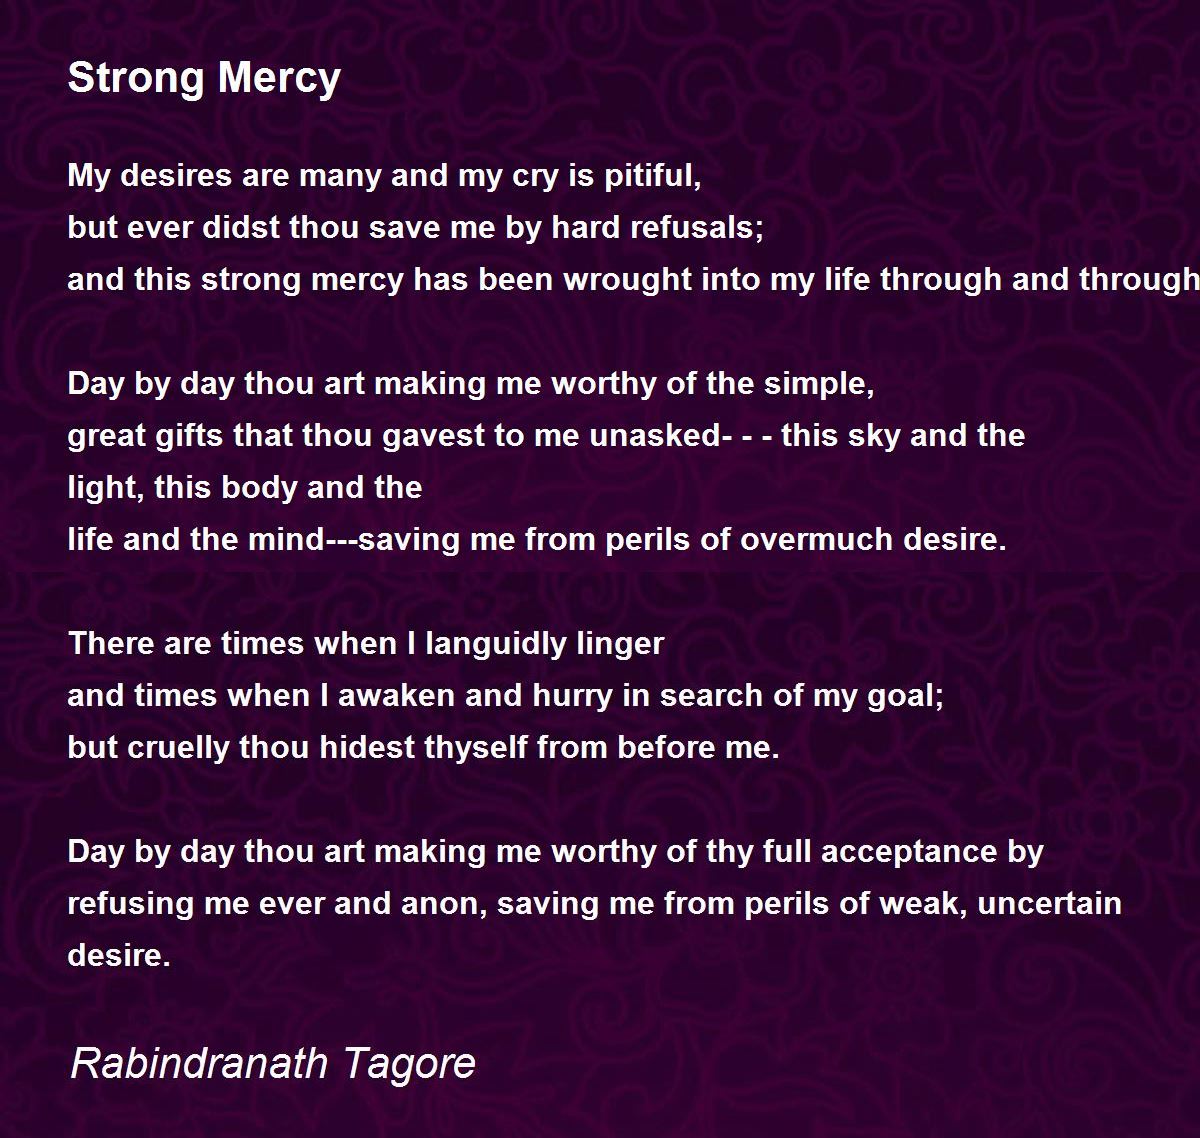 Strong Mercy Poem by Rabindranath Tagore - Poem Hunter